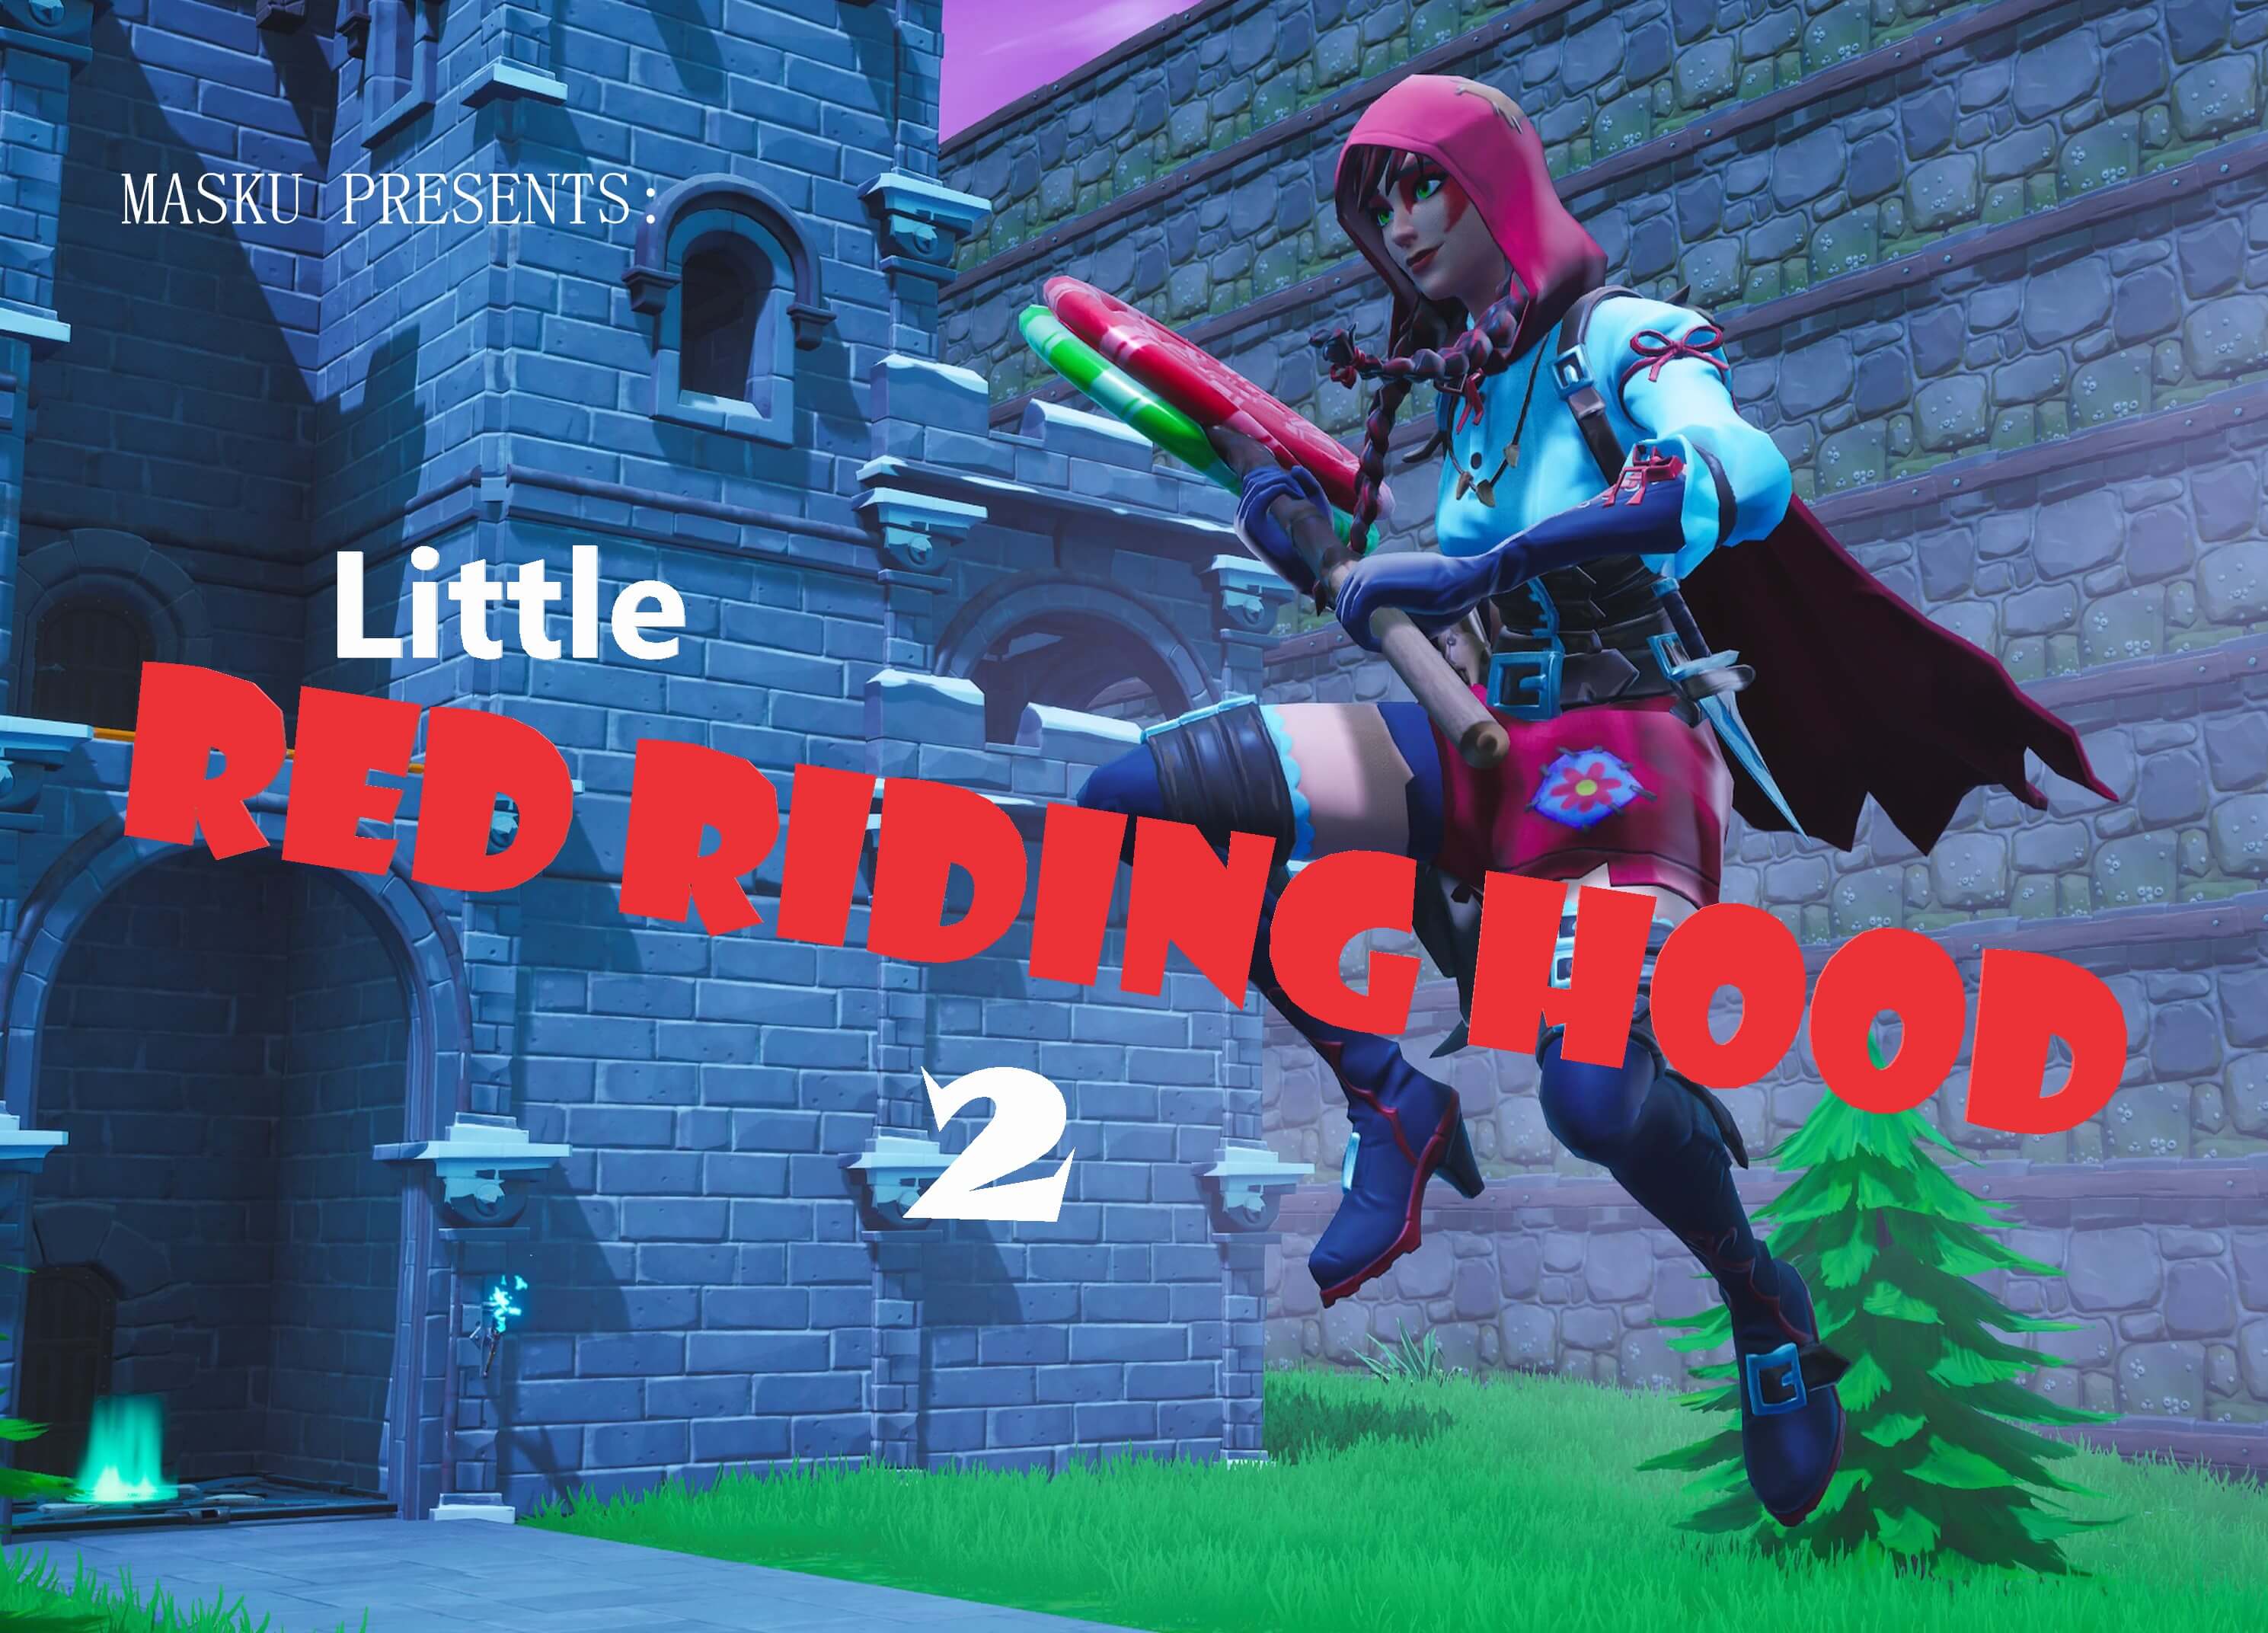 LITTLE RED RIDING HOOD 2